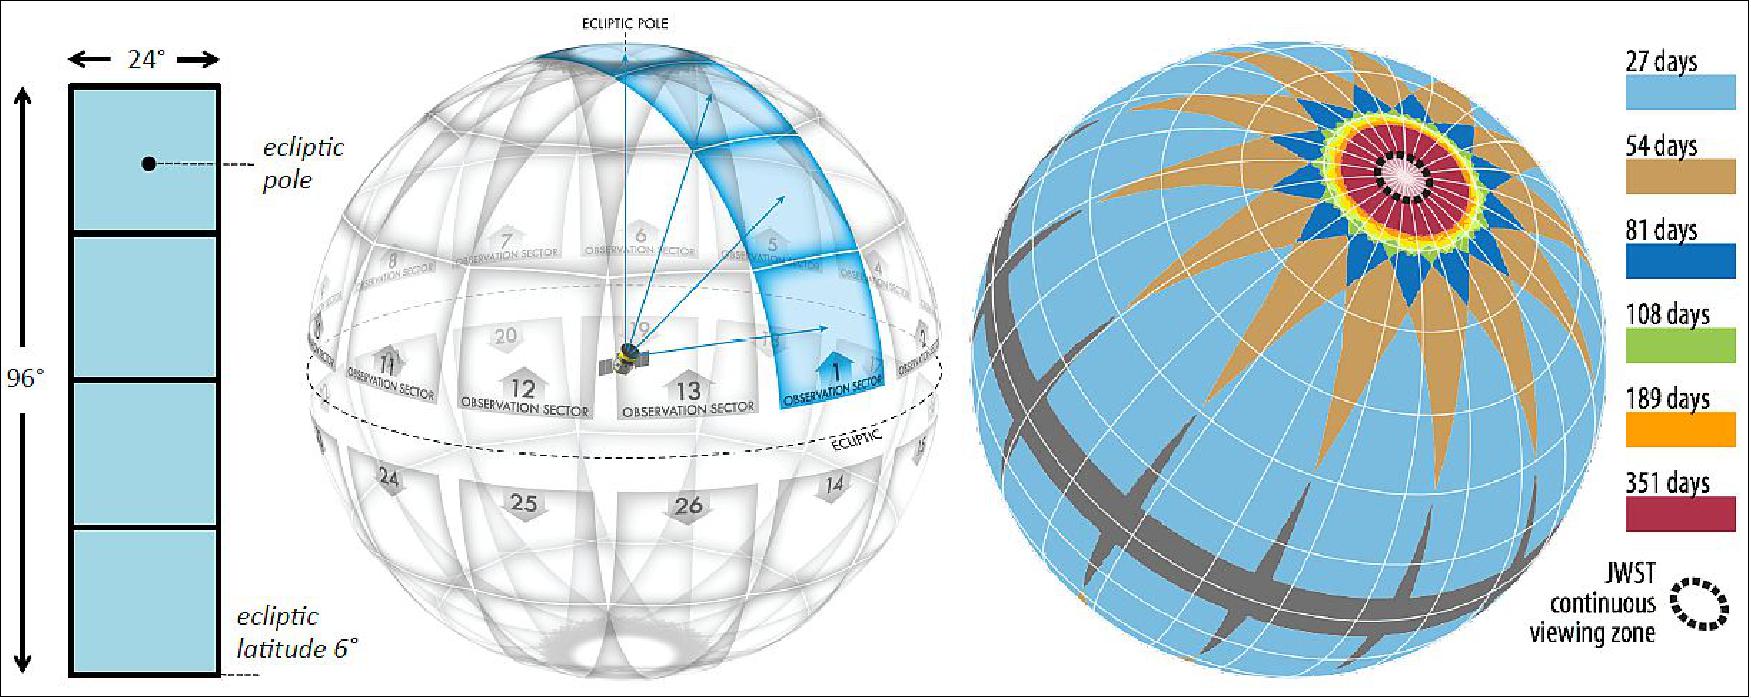 Figure 71: Left: The instantaneous combined FOV of the four TESS cameras. Middle: Division of the celestial sphere into 26 observation sectors (13 per hemisphere). Right: Duration of observations on the celestial sphere, taking into account the overlap between sectors. The dashed black circle enclosing the ecliptic pole shows the region which JWST will be able to observe at any time (image credit: TESS Team)